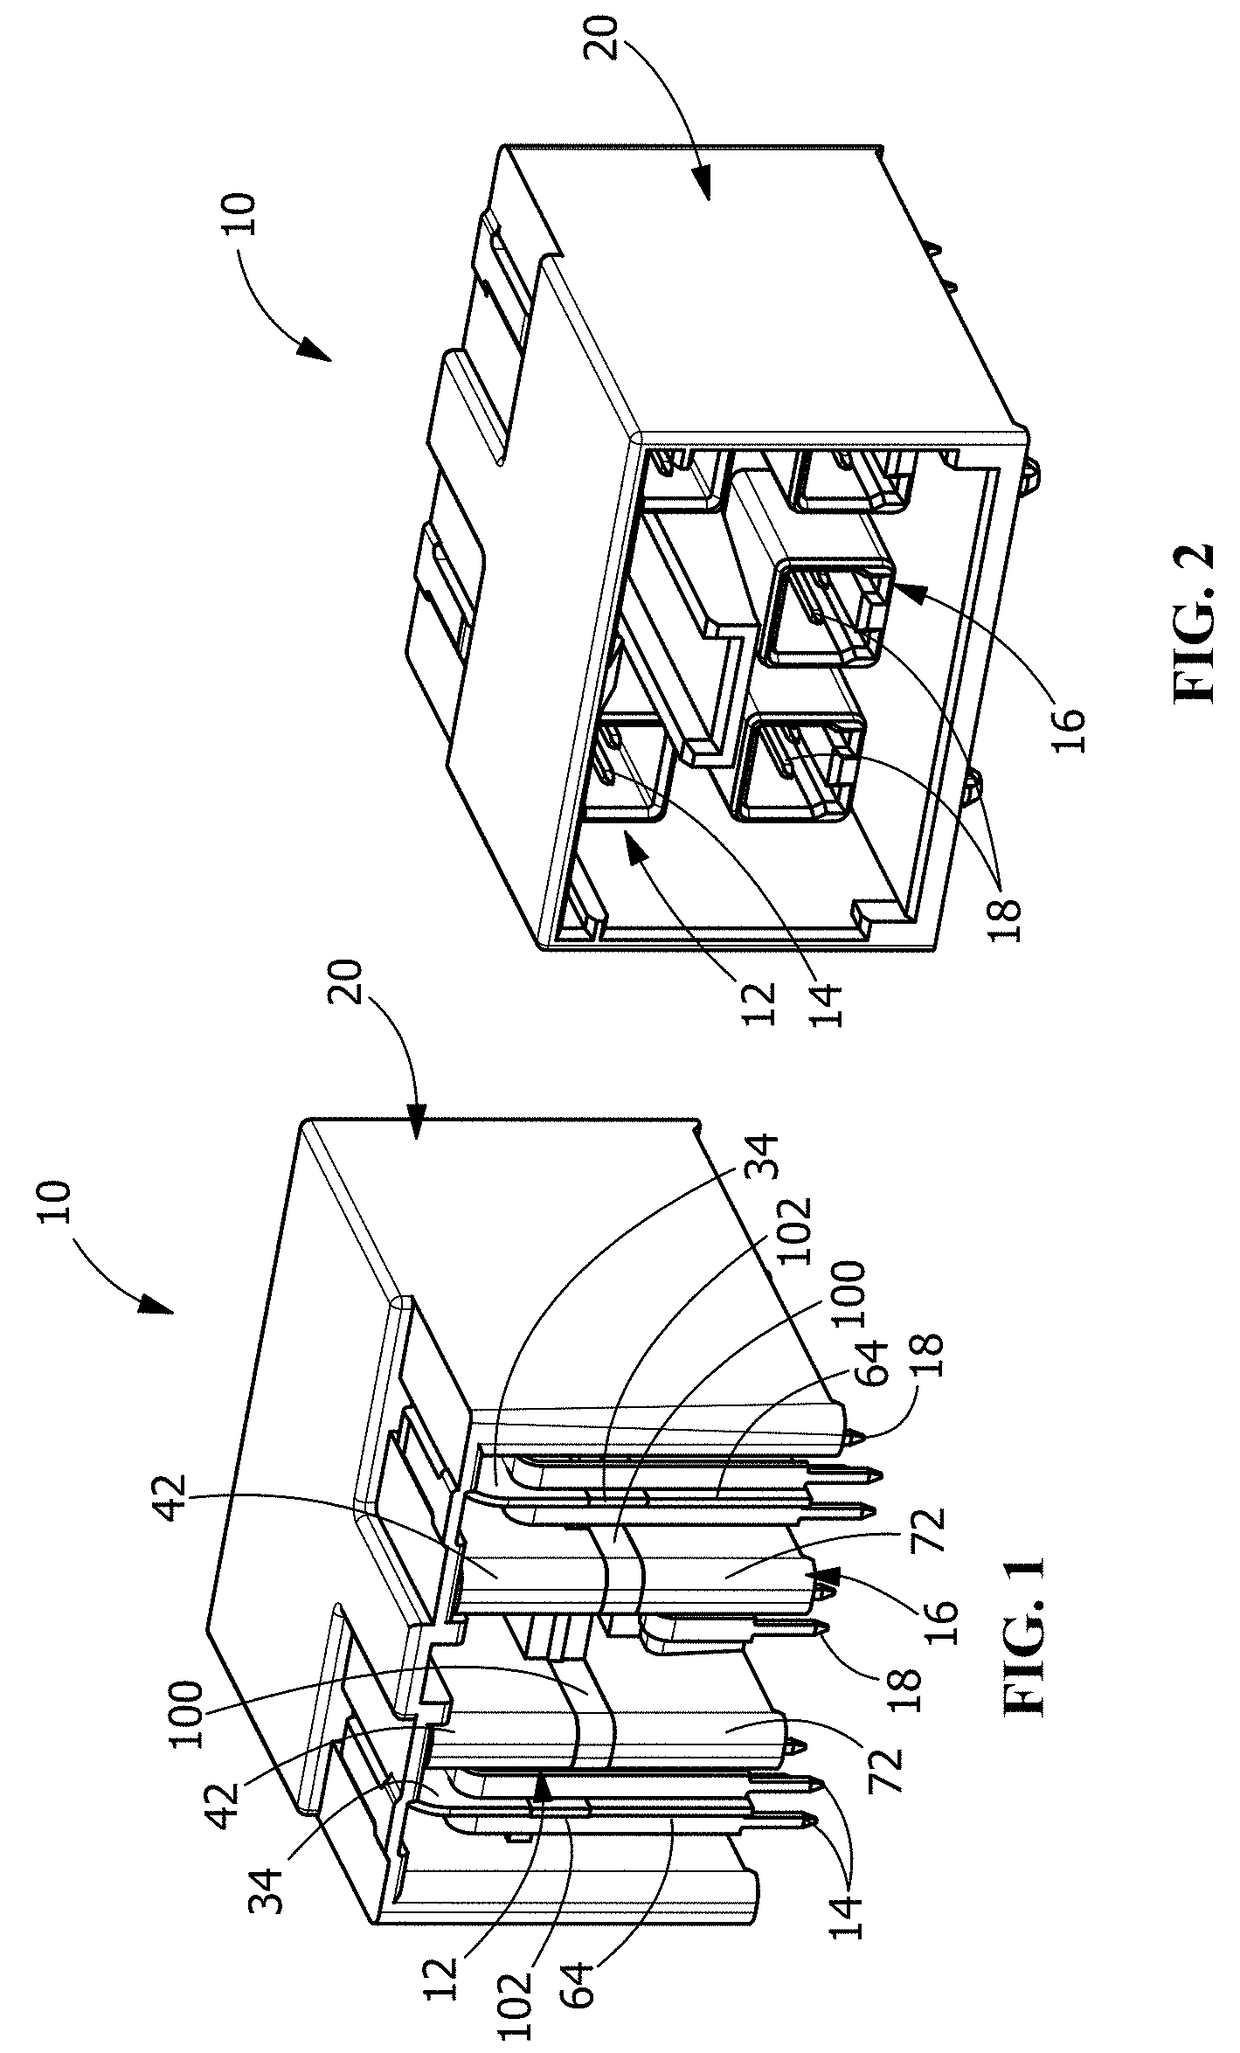 Modular electrical connector and method of assembly